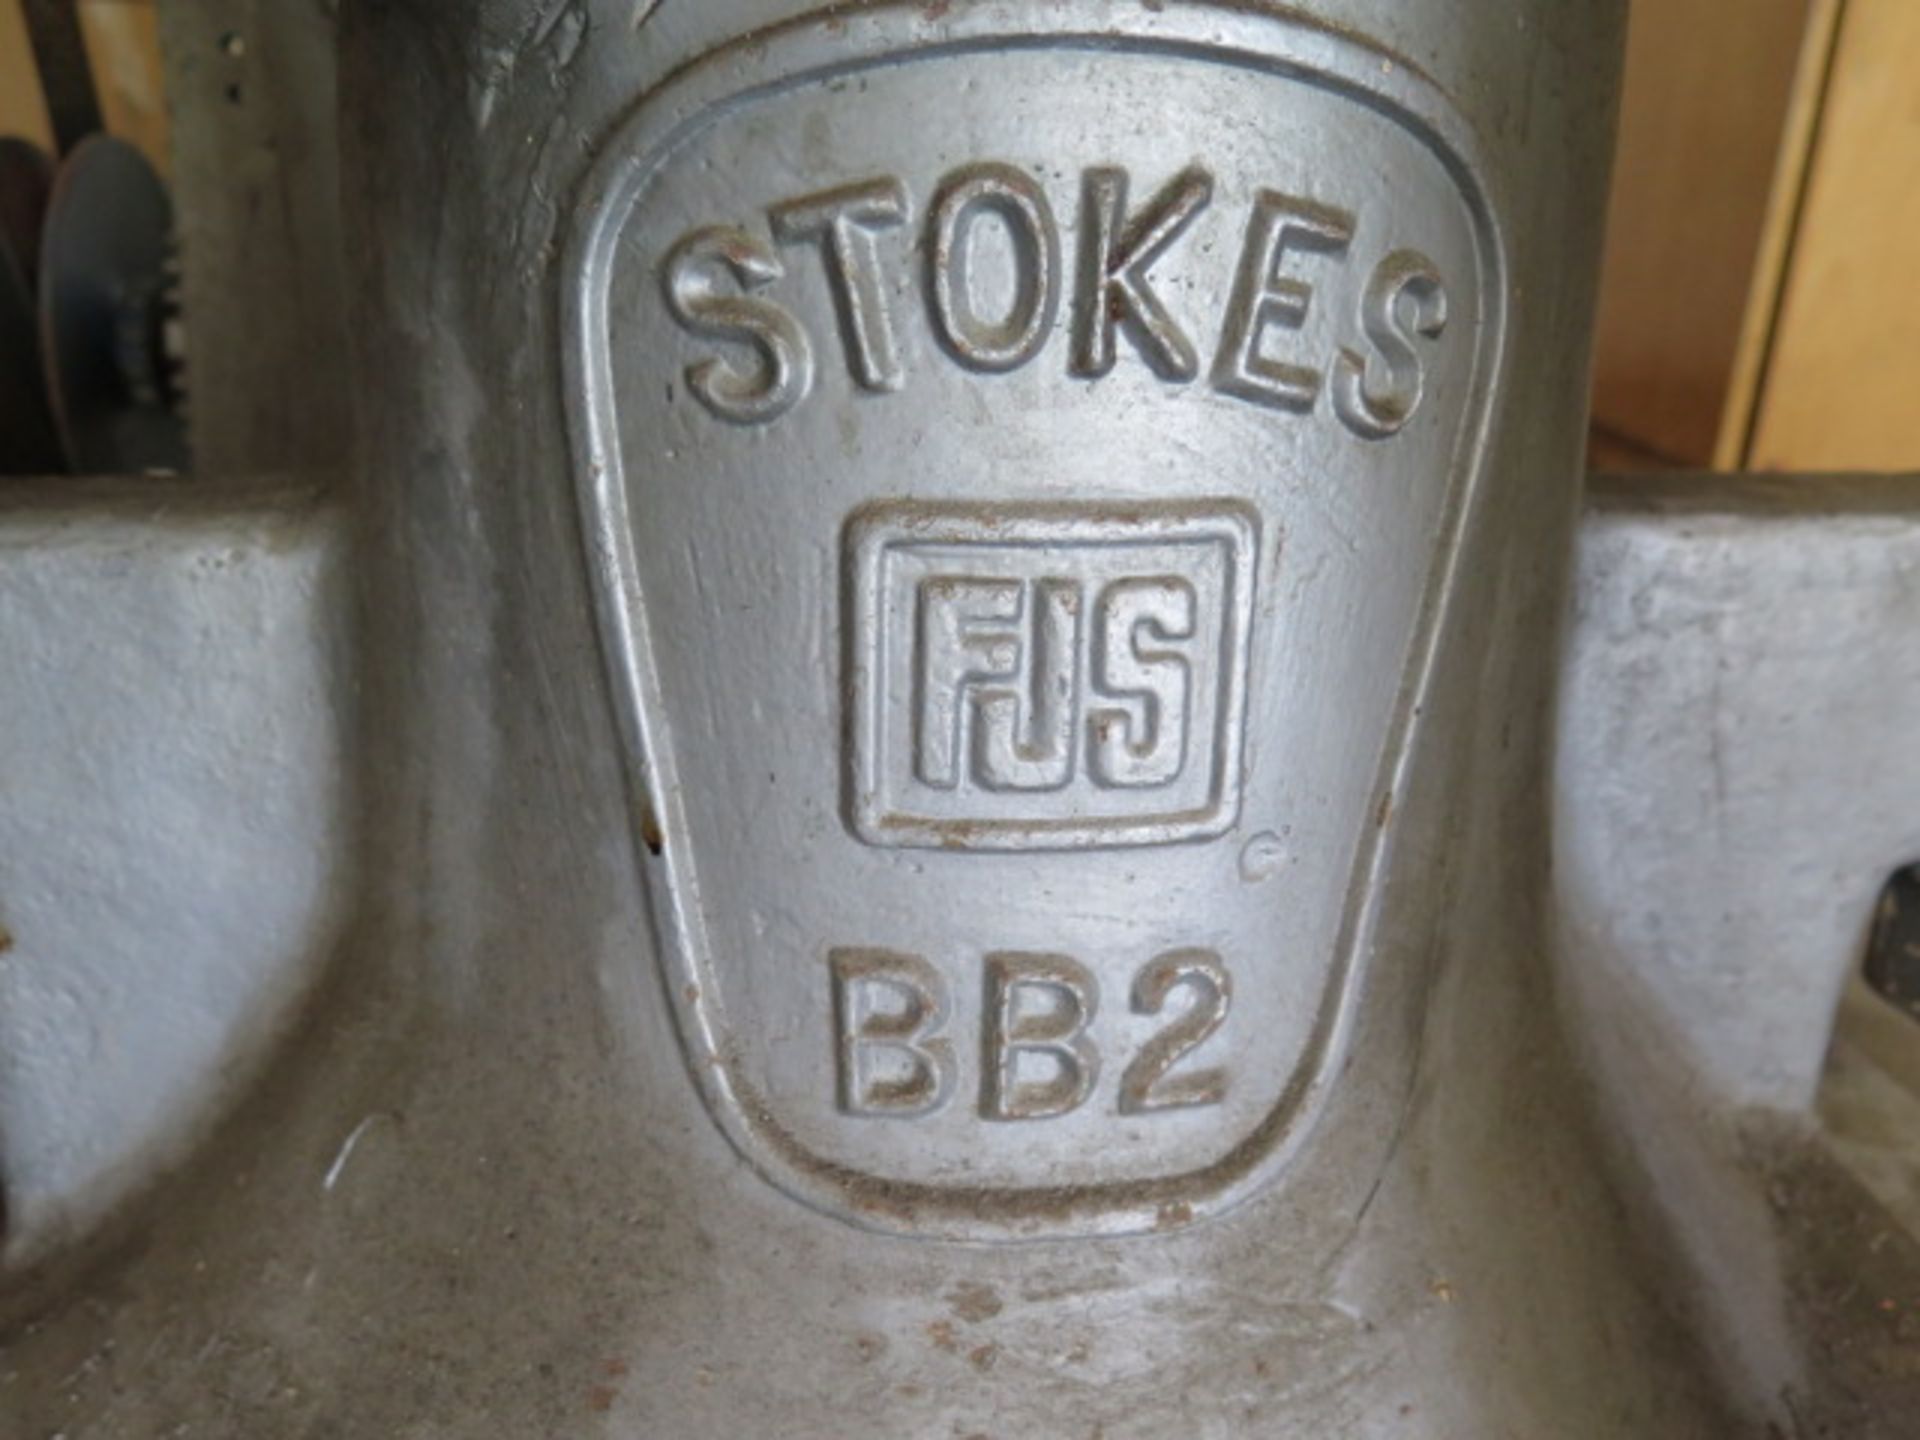 Stokes BB2 Keyed Tablet Press (SOLD AS-IS - NO WARRANTY) - Image 12 of 12